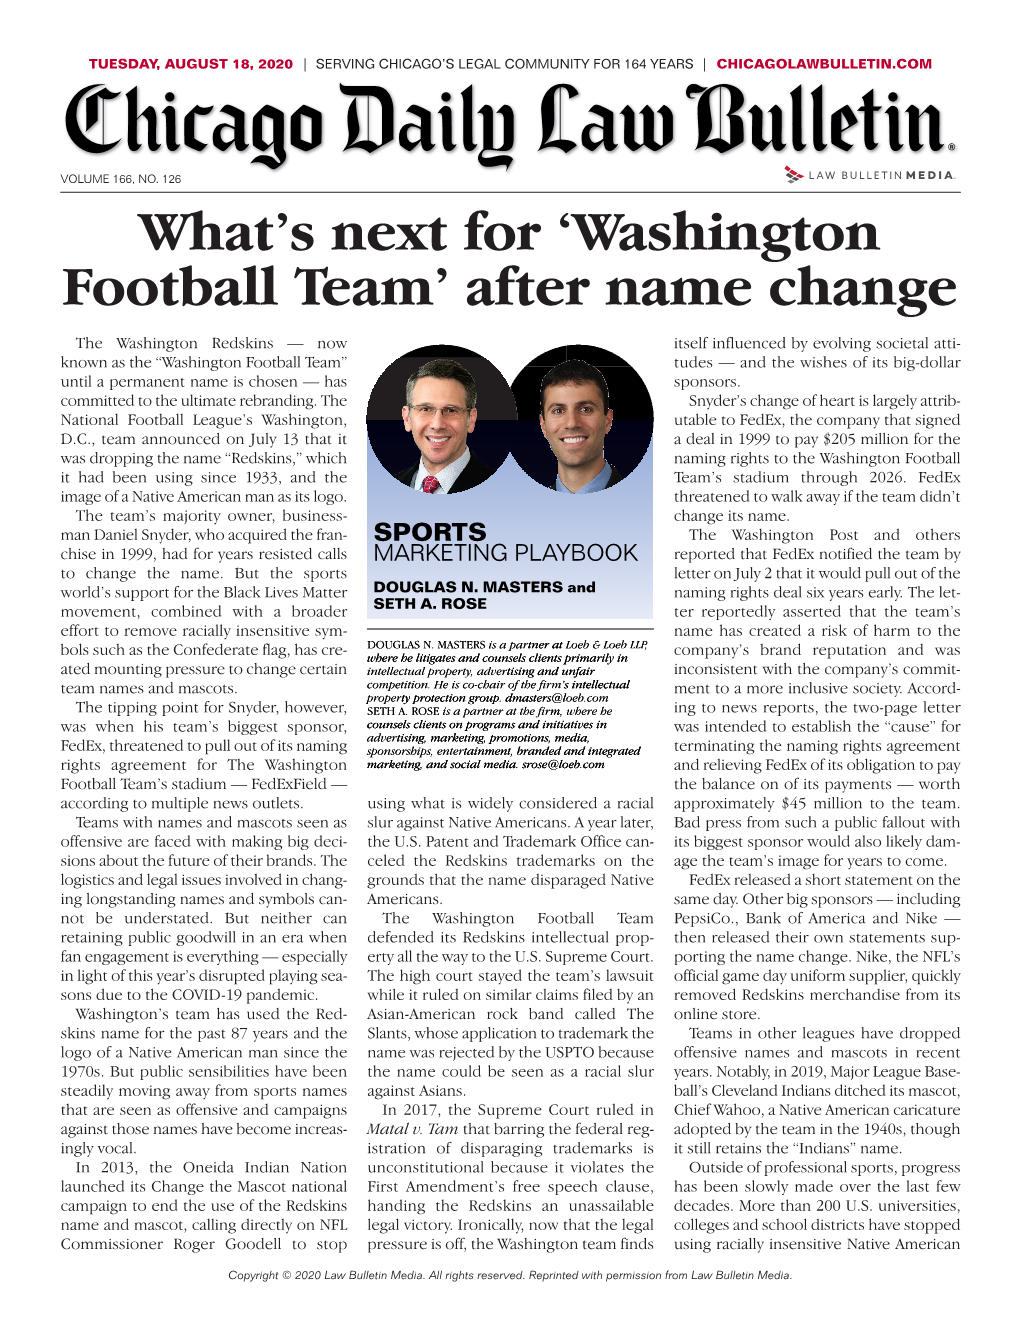 What's Next for 'Washington Football Team' After Name Change